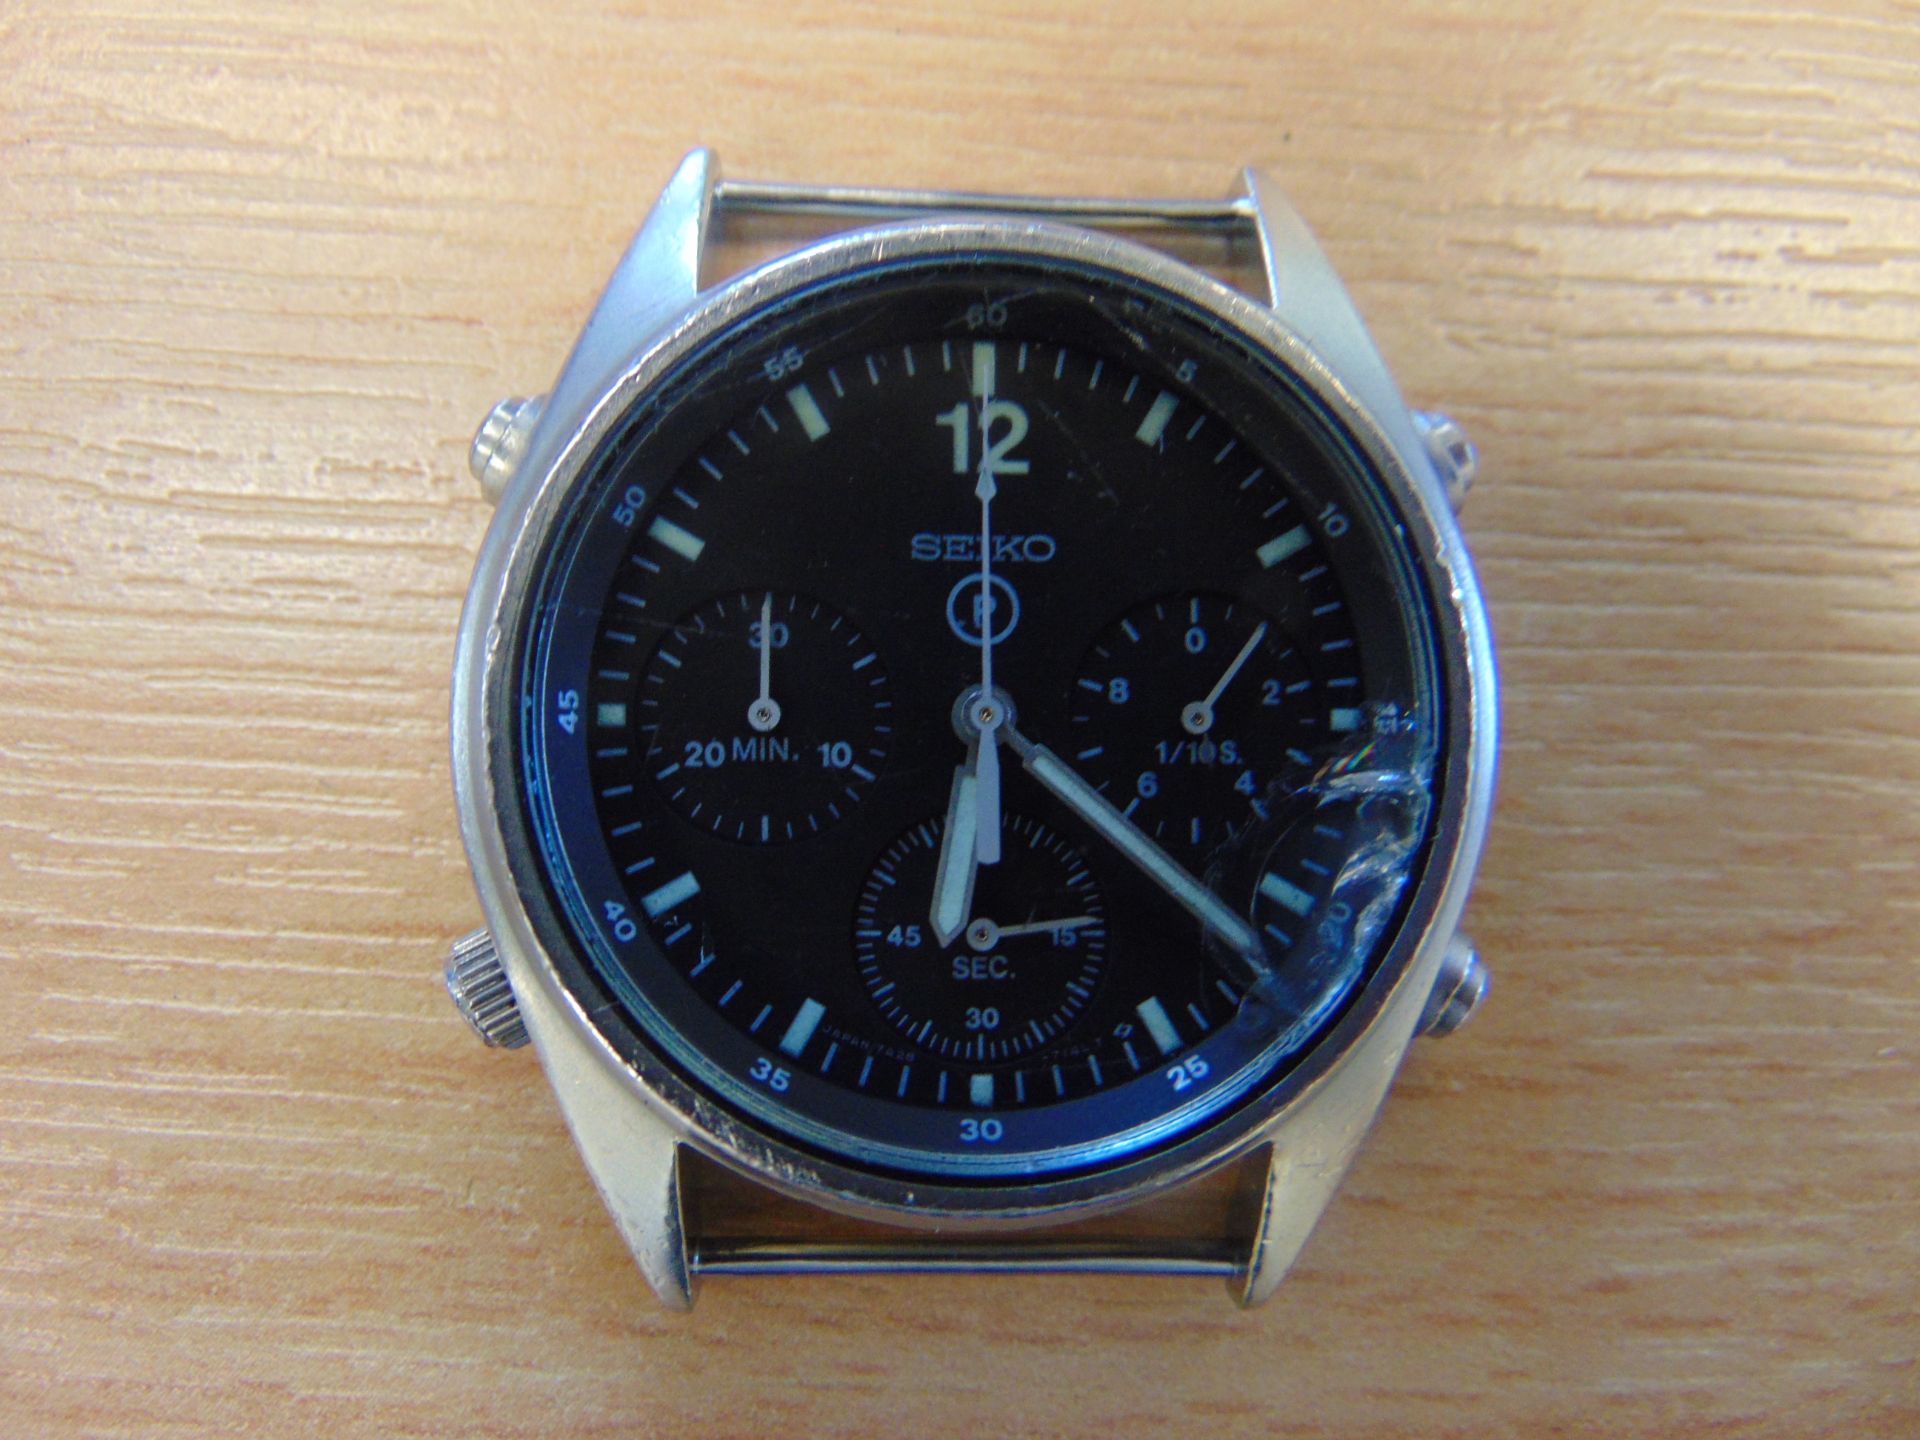 Seiko Gen 1 Pilots Chrono RAF Harrier Force Issue with Nato Marks, Date 1989 - Image 3 of 6